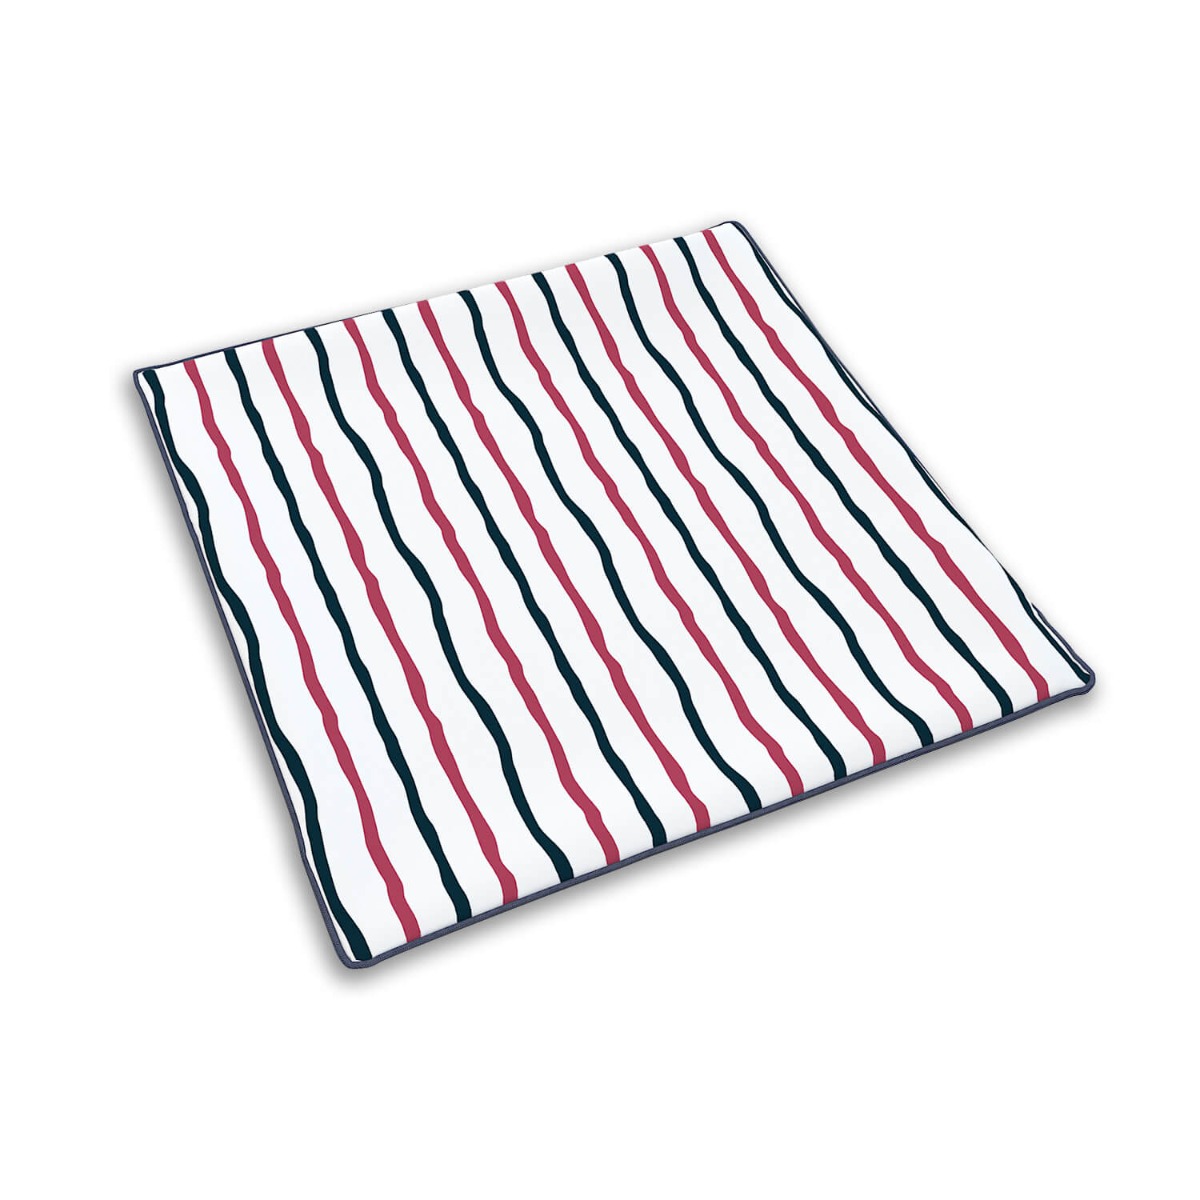 Stripes Pillow Cover